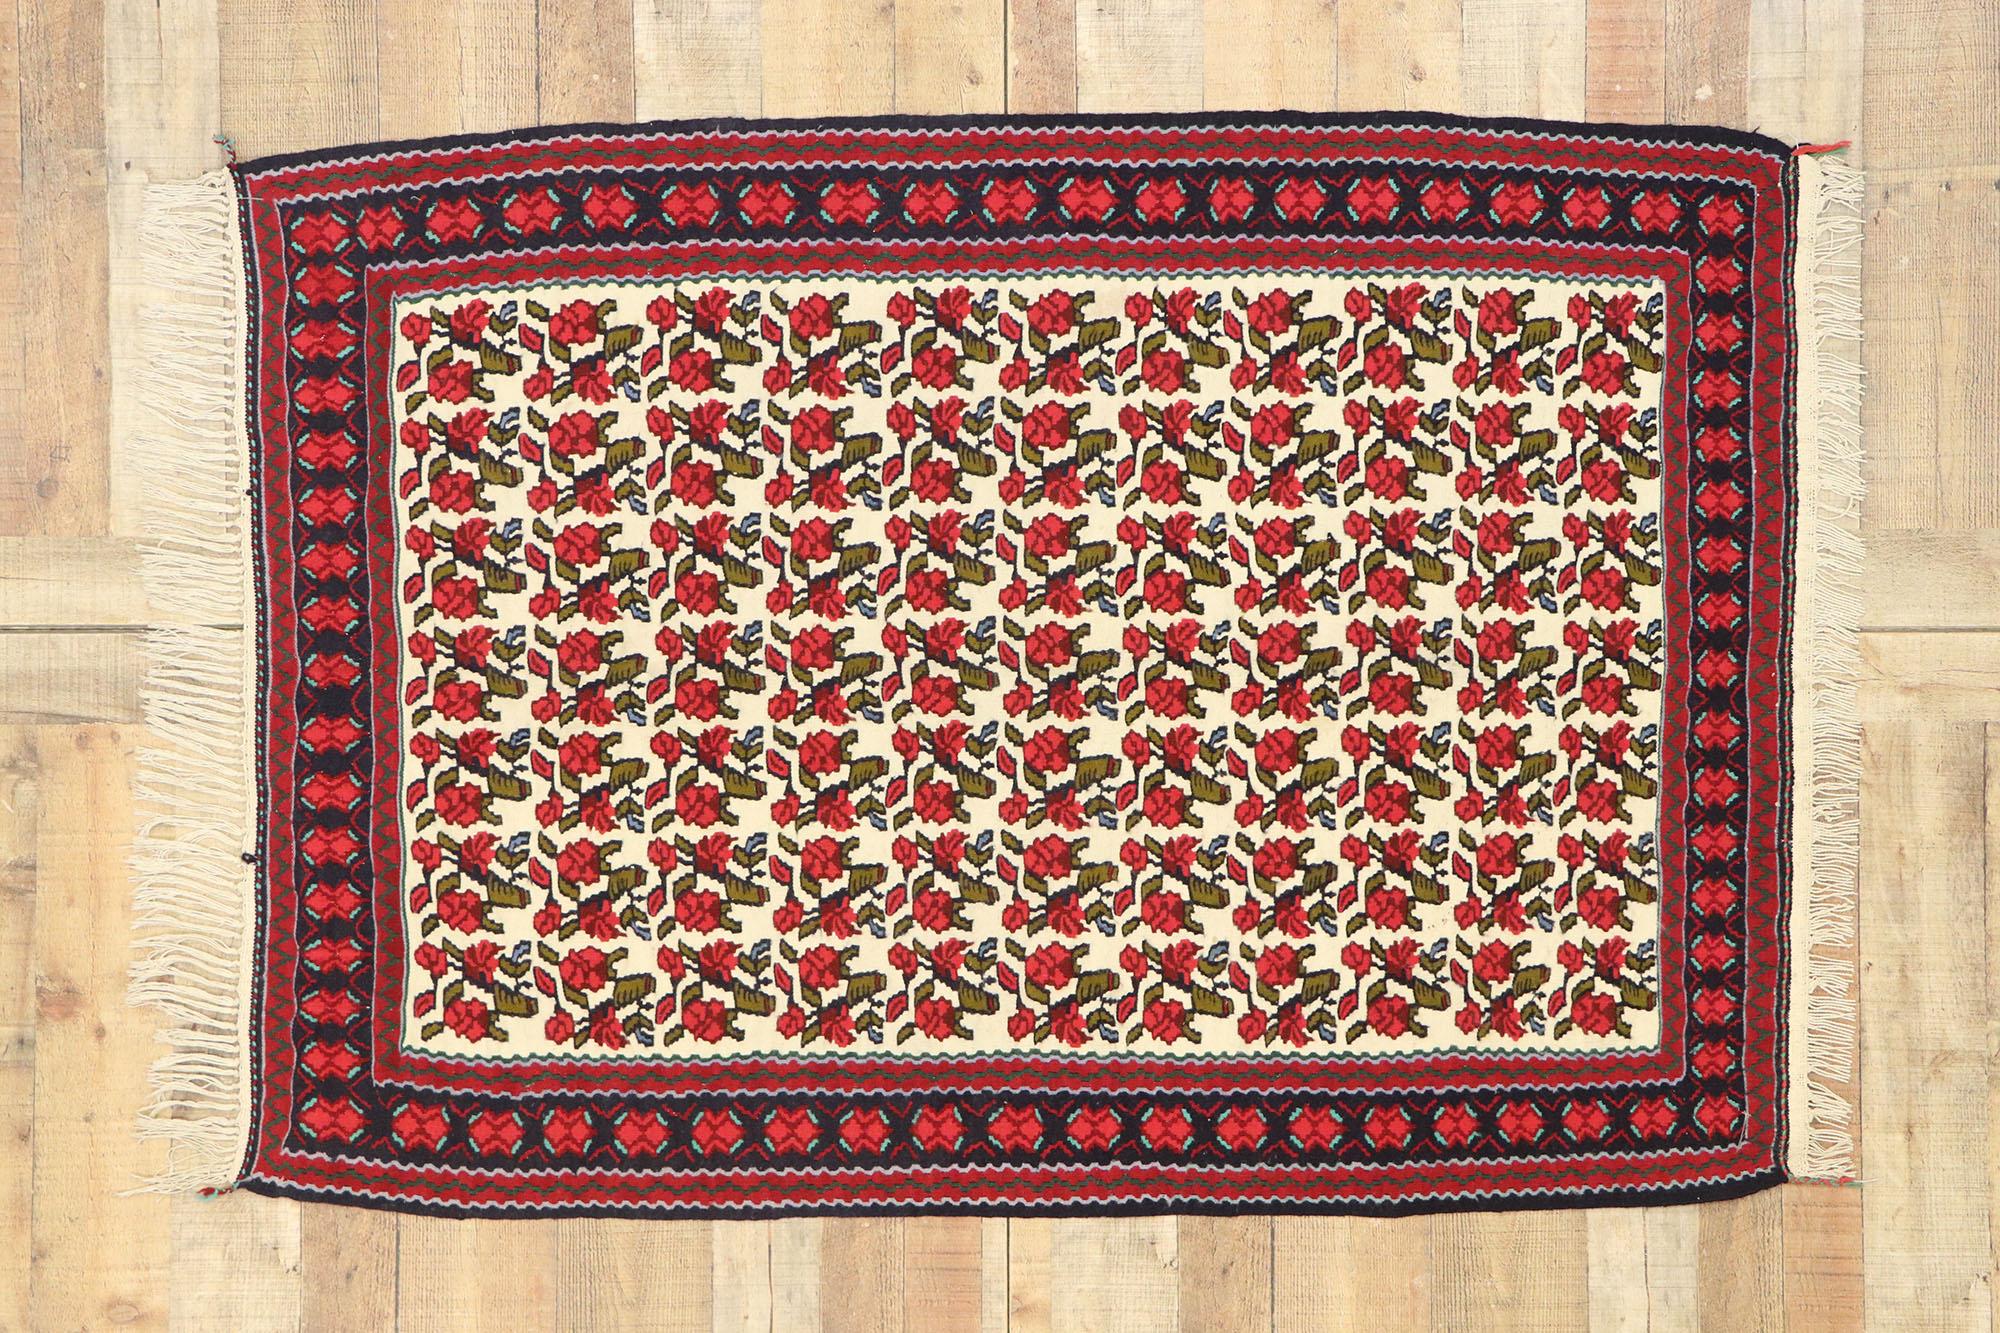 Vintage Persian Floral Kilim Rug with English Tudor Manor House Style 1